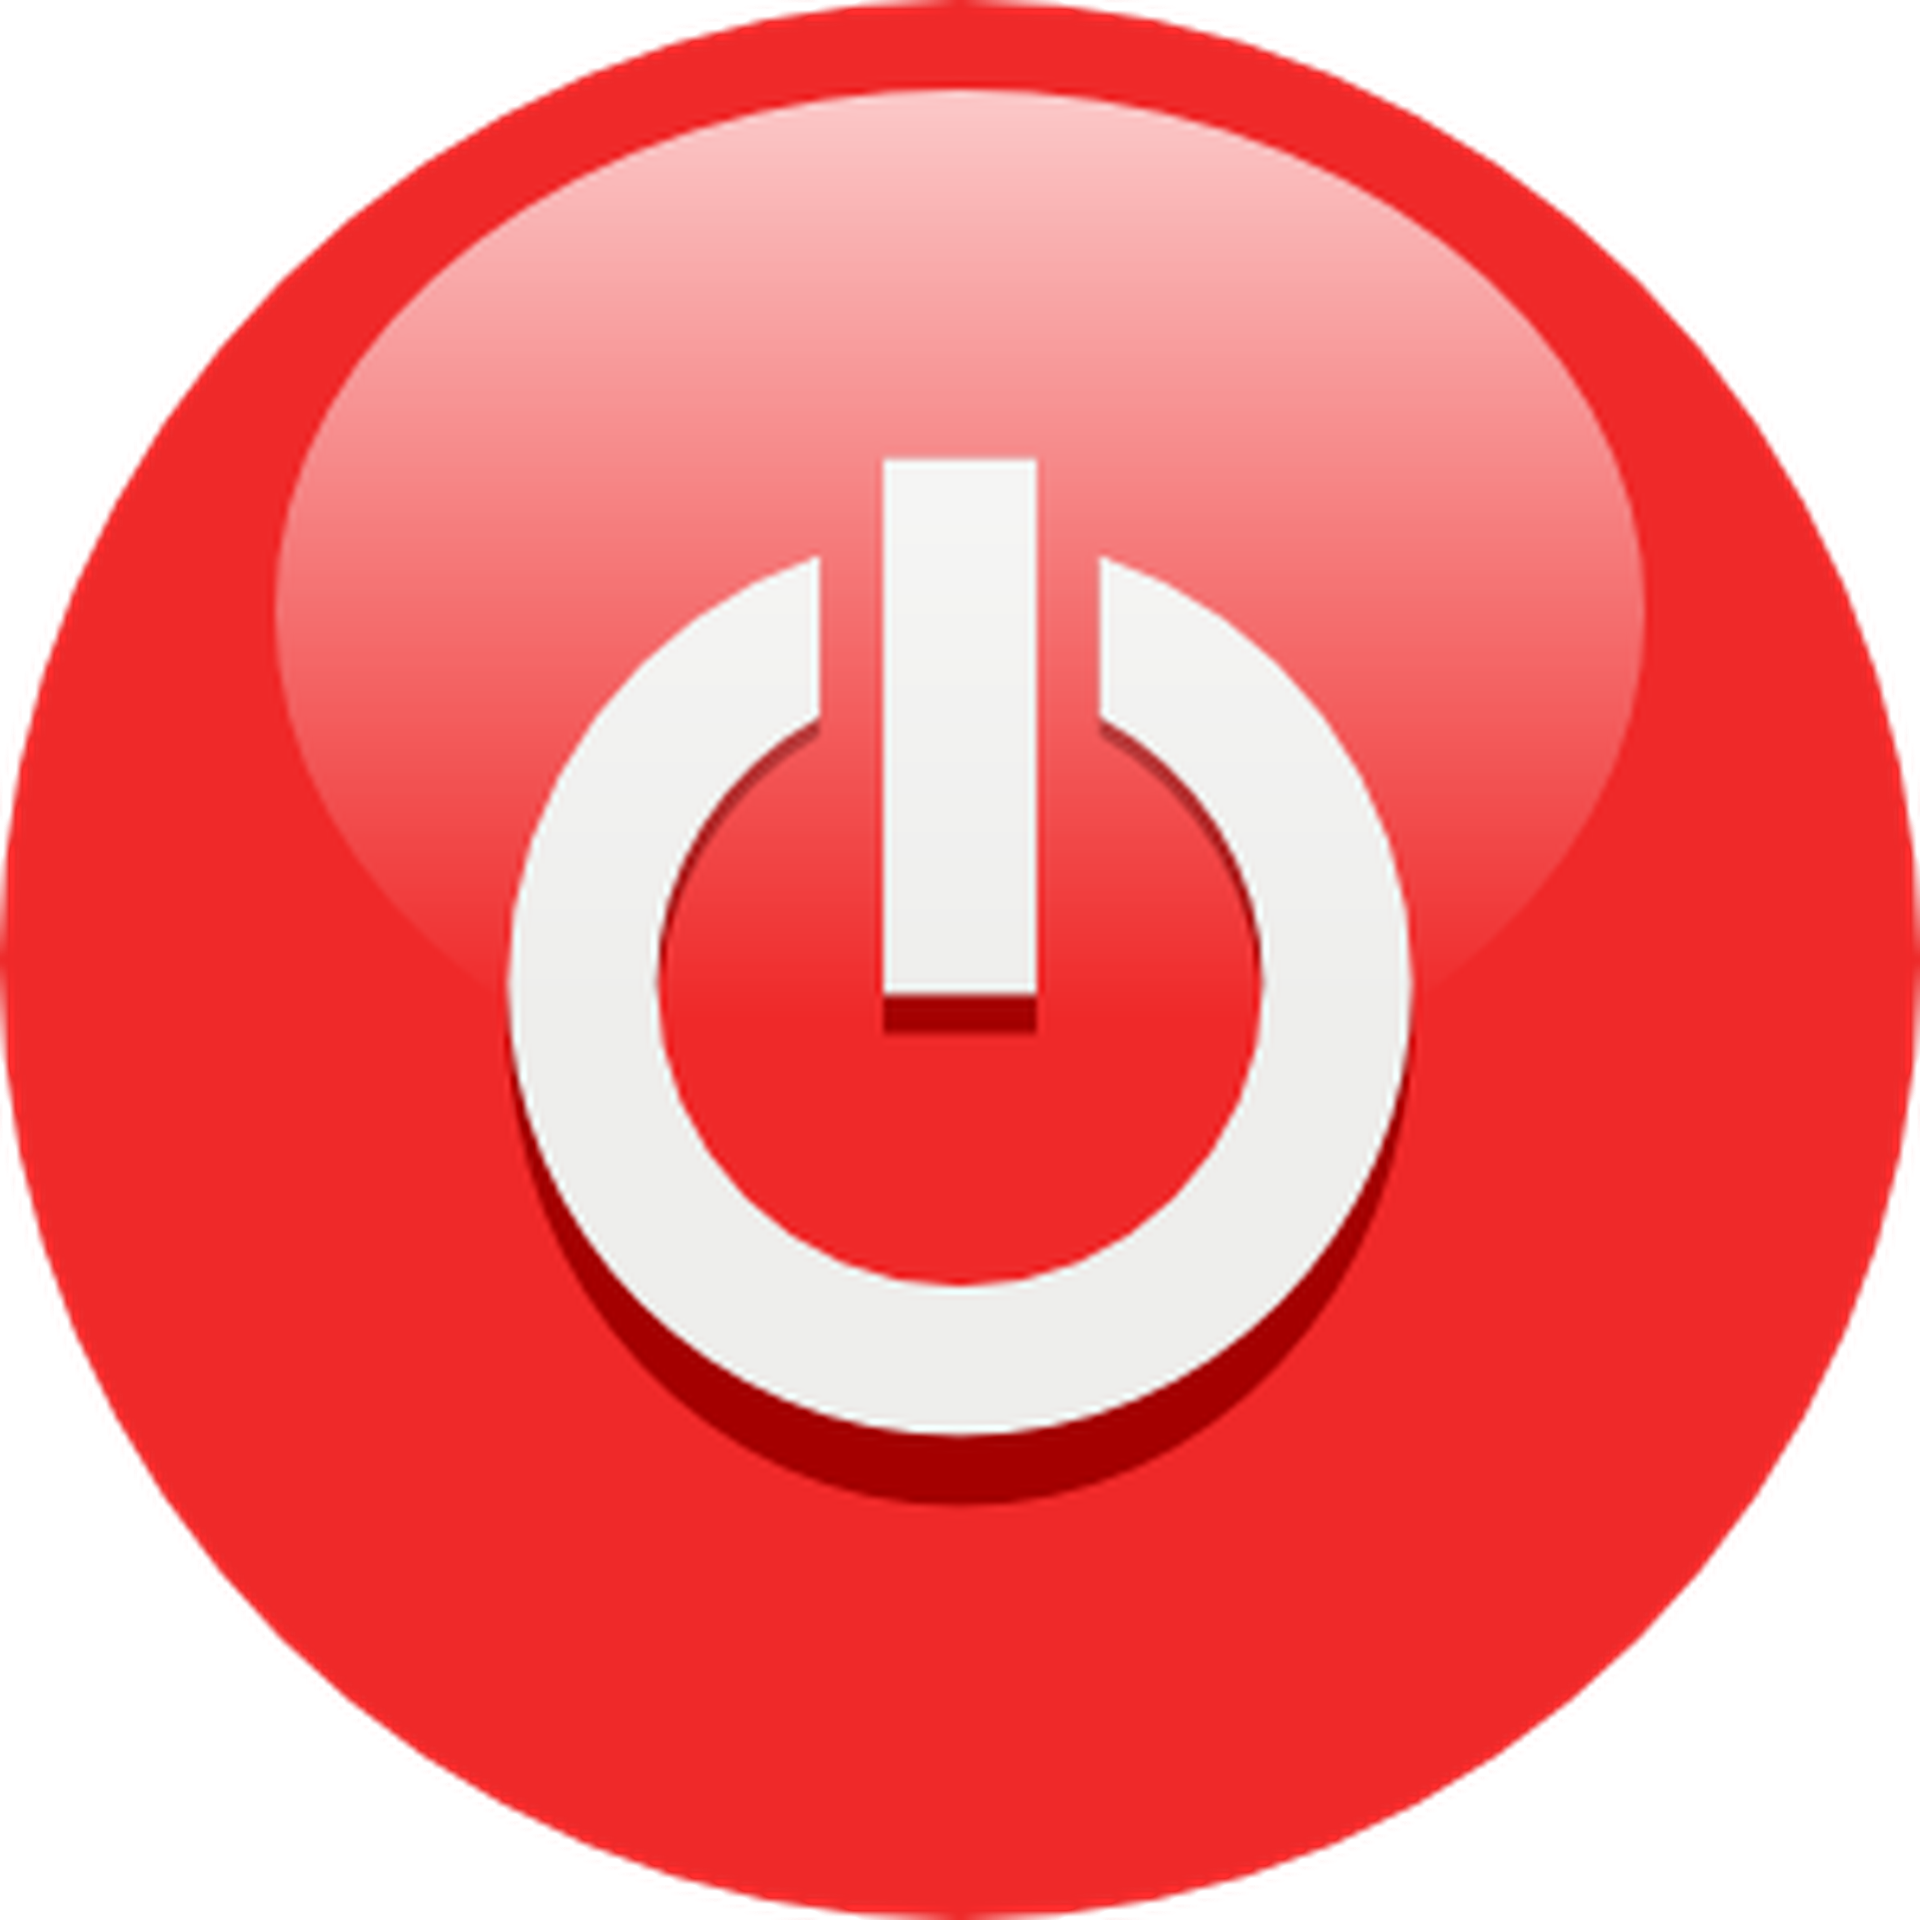 A Red Button With A White Power Button